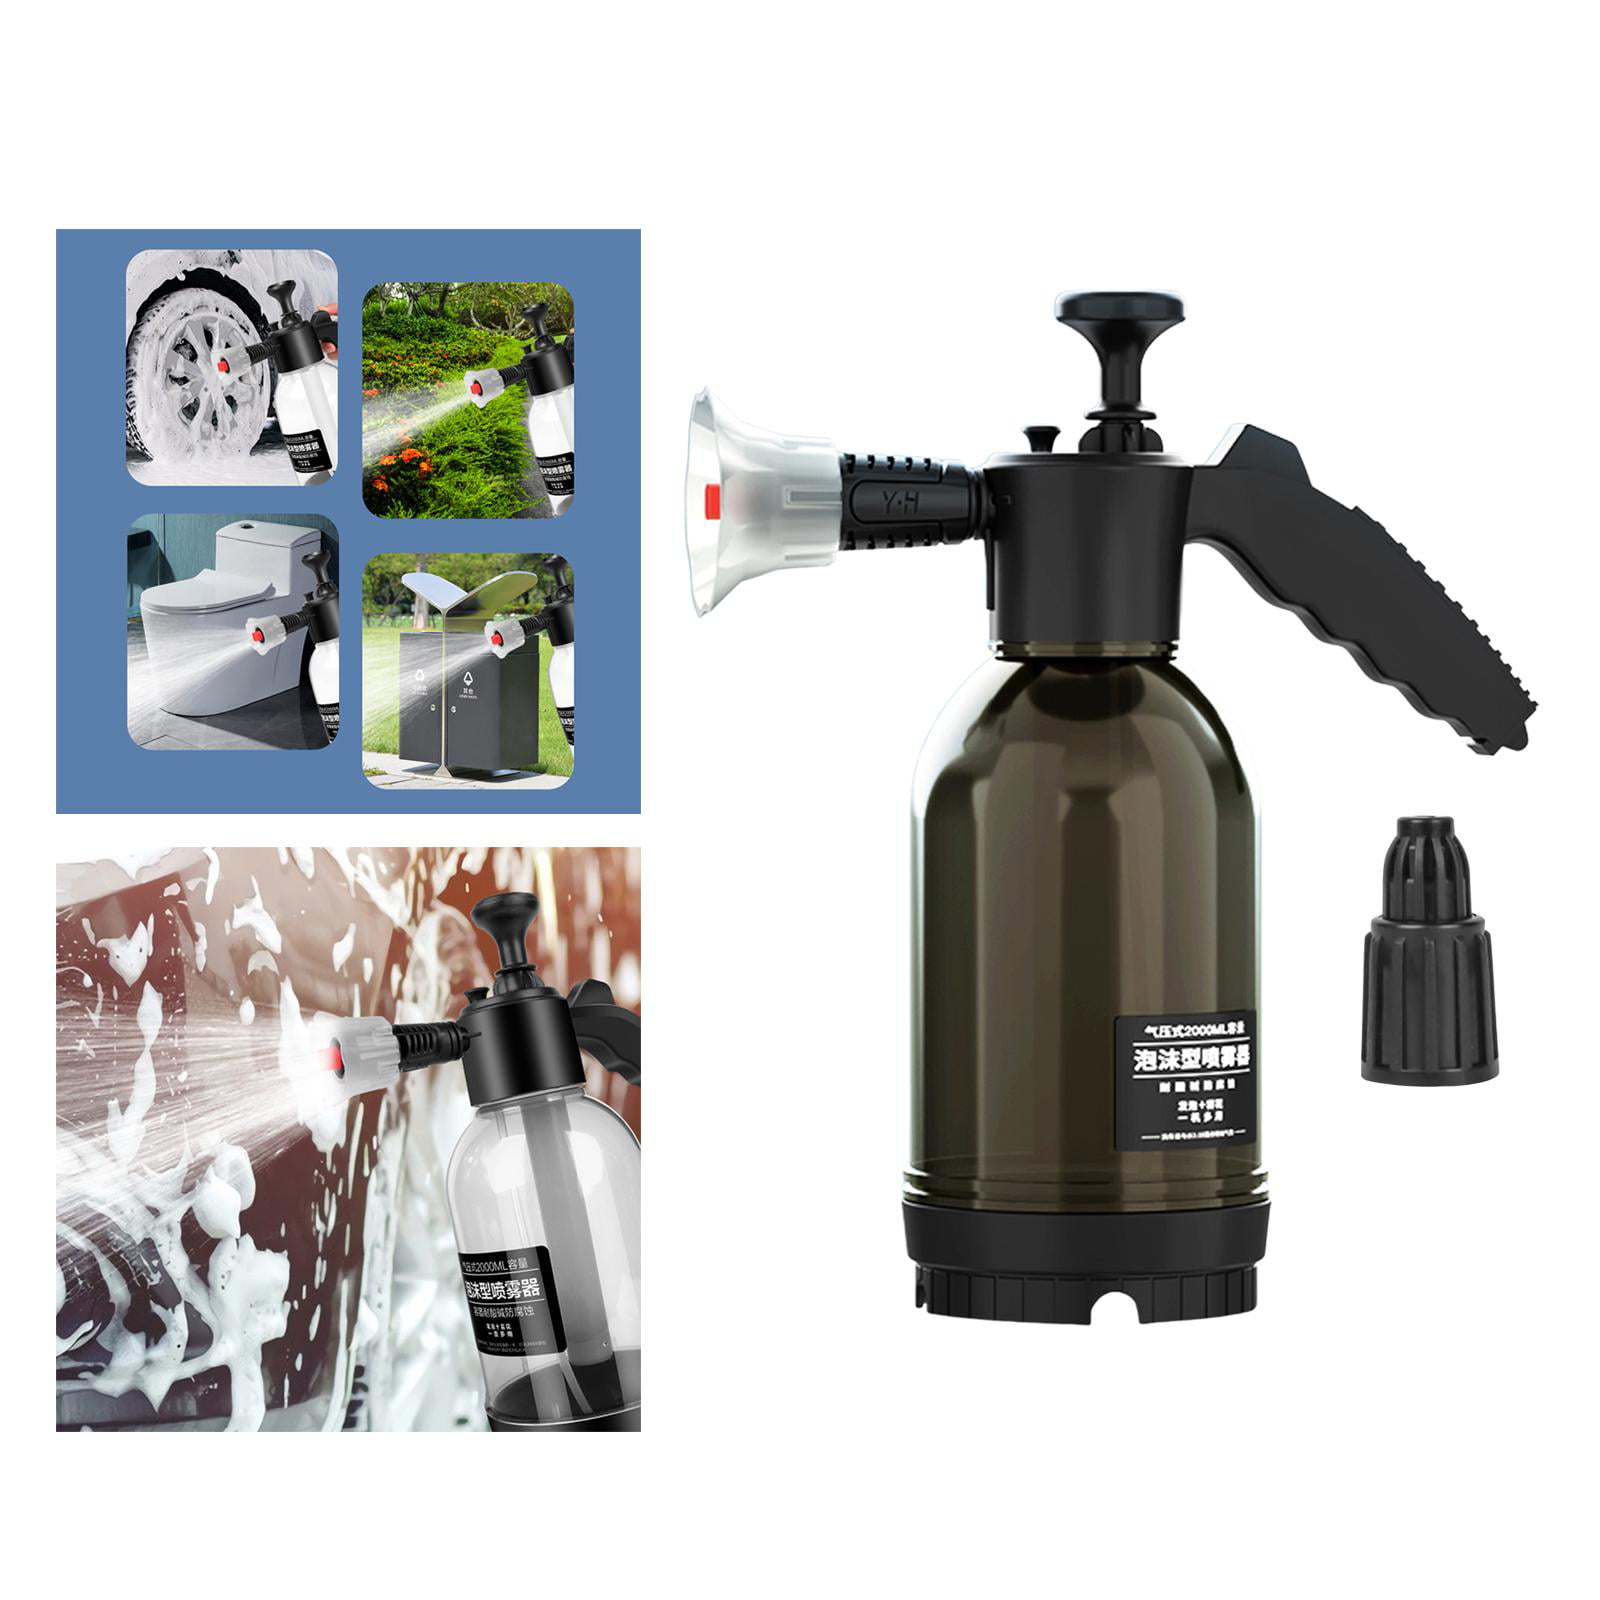 .0L Car Wash Pump Manual Foaming Sprayer High Pressure Spraying for Home,  Lawn, Garden, Car Detailing and More Easy Operation Durable